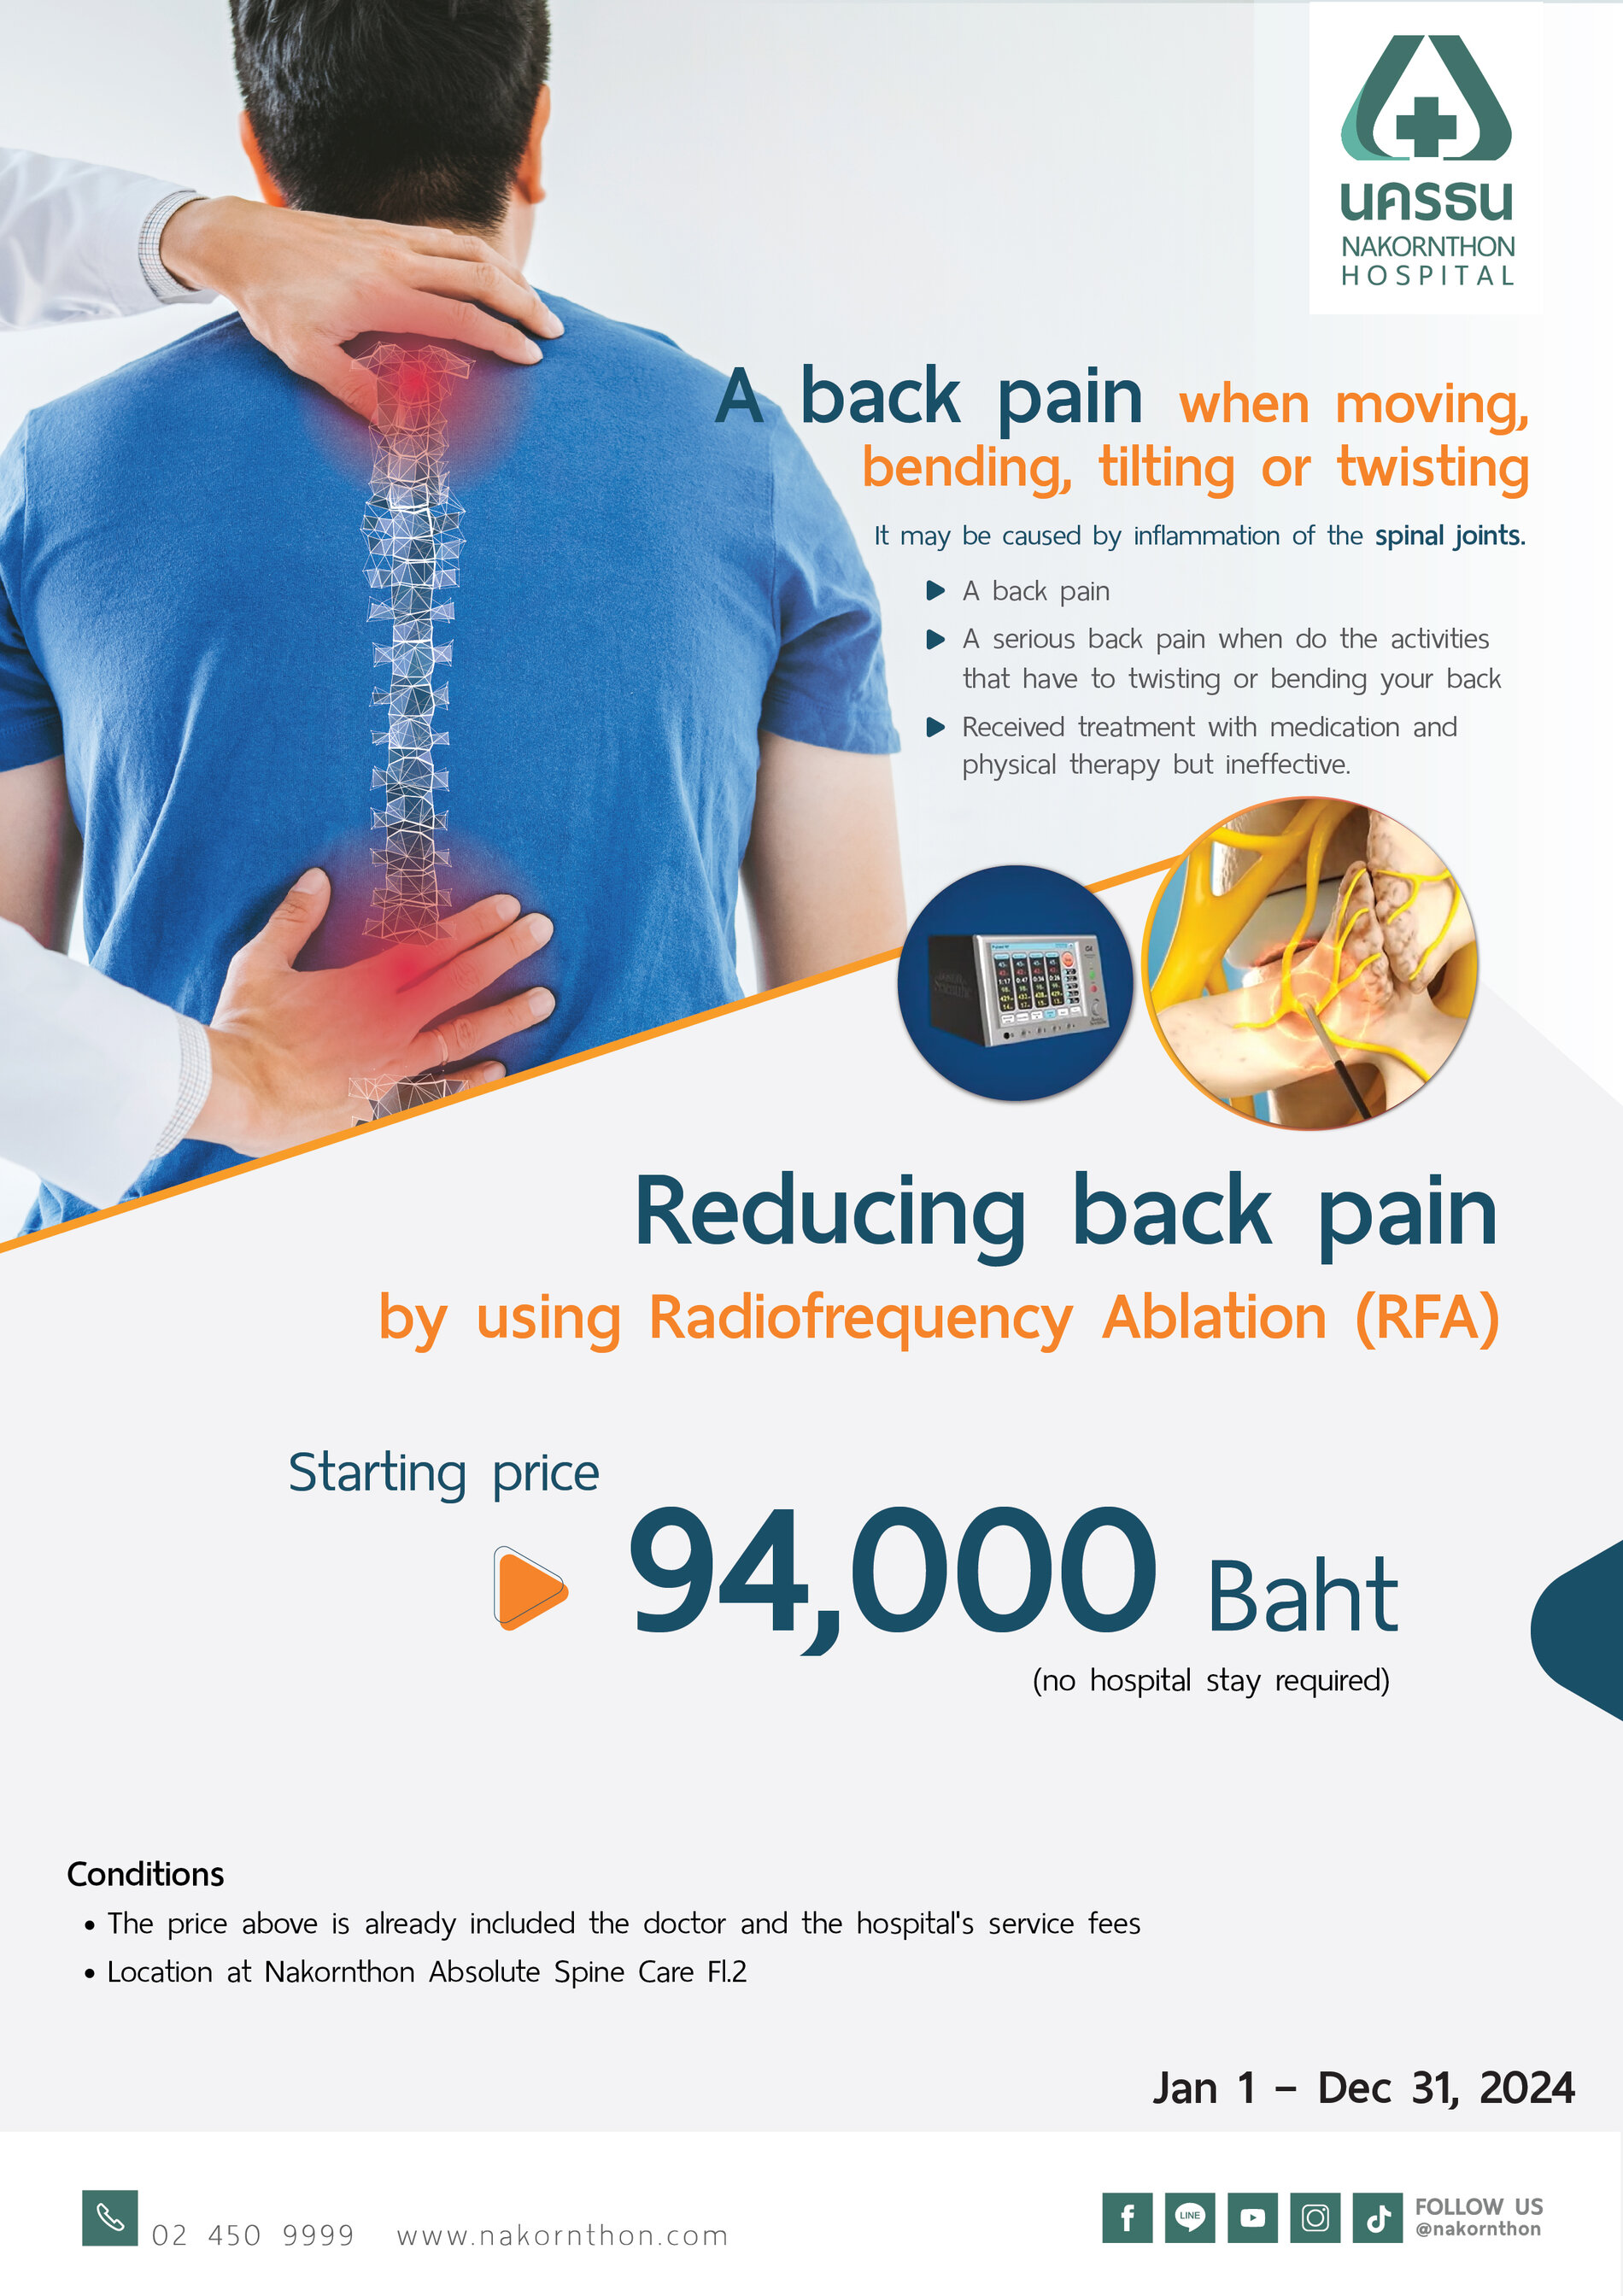 Reducing back pain by using Radiofrequency Ablation (RFA)